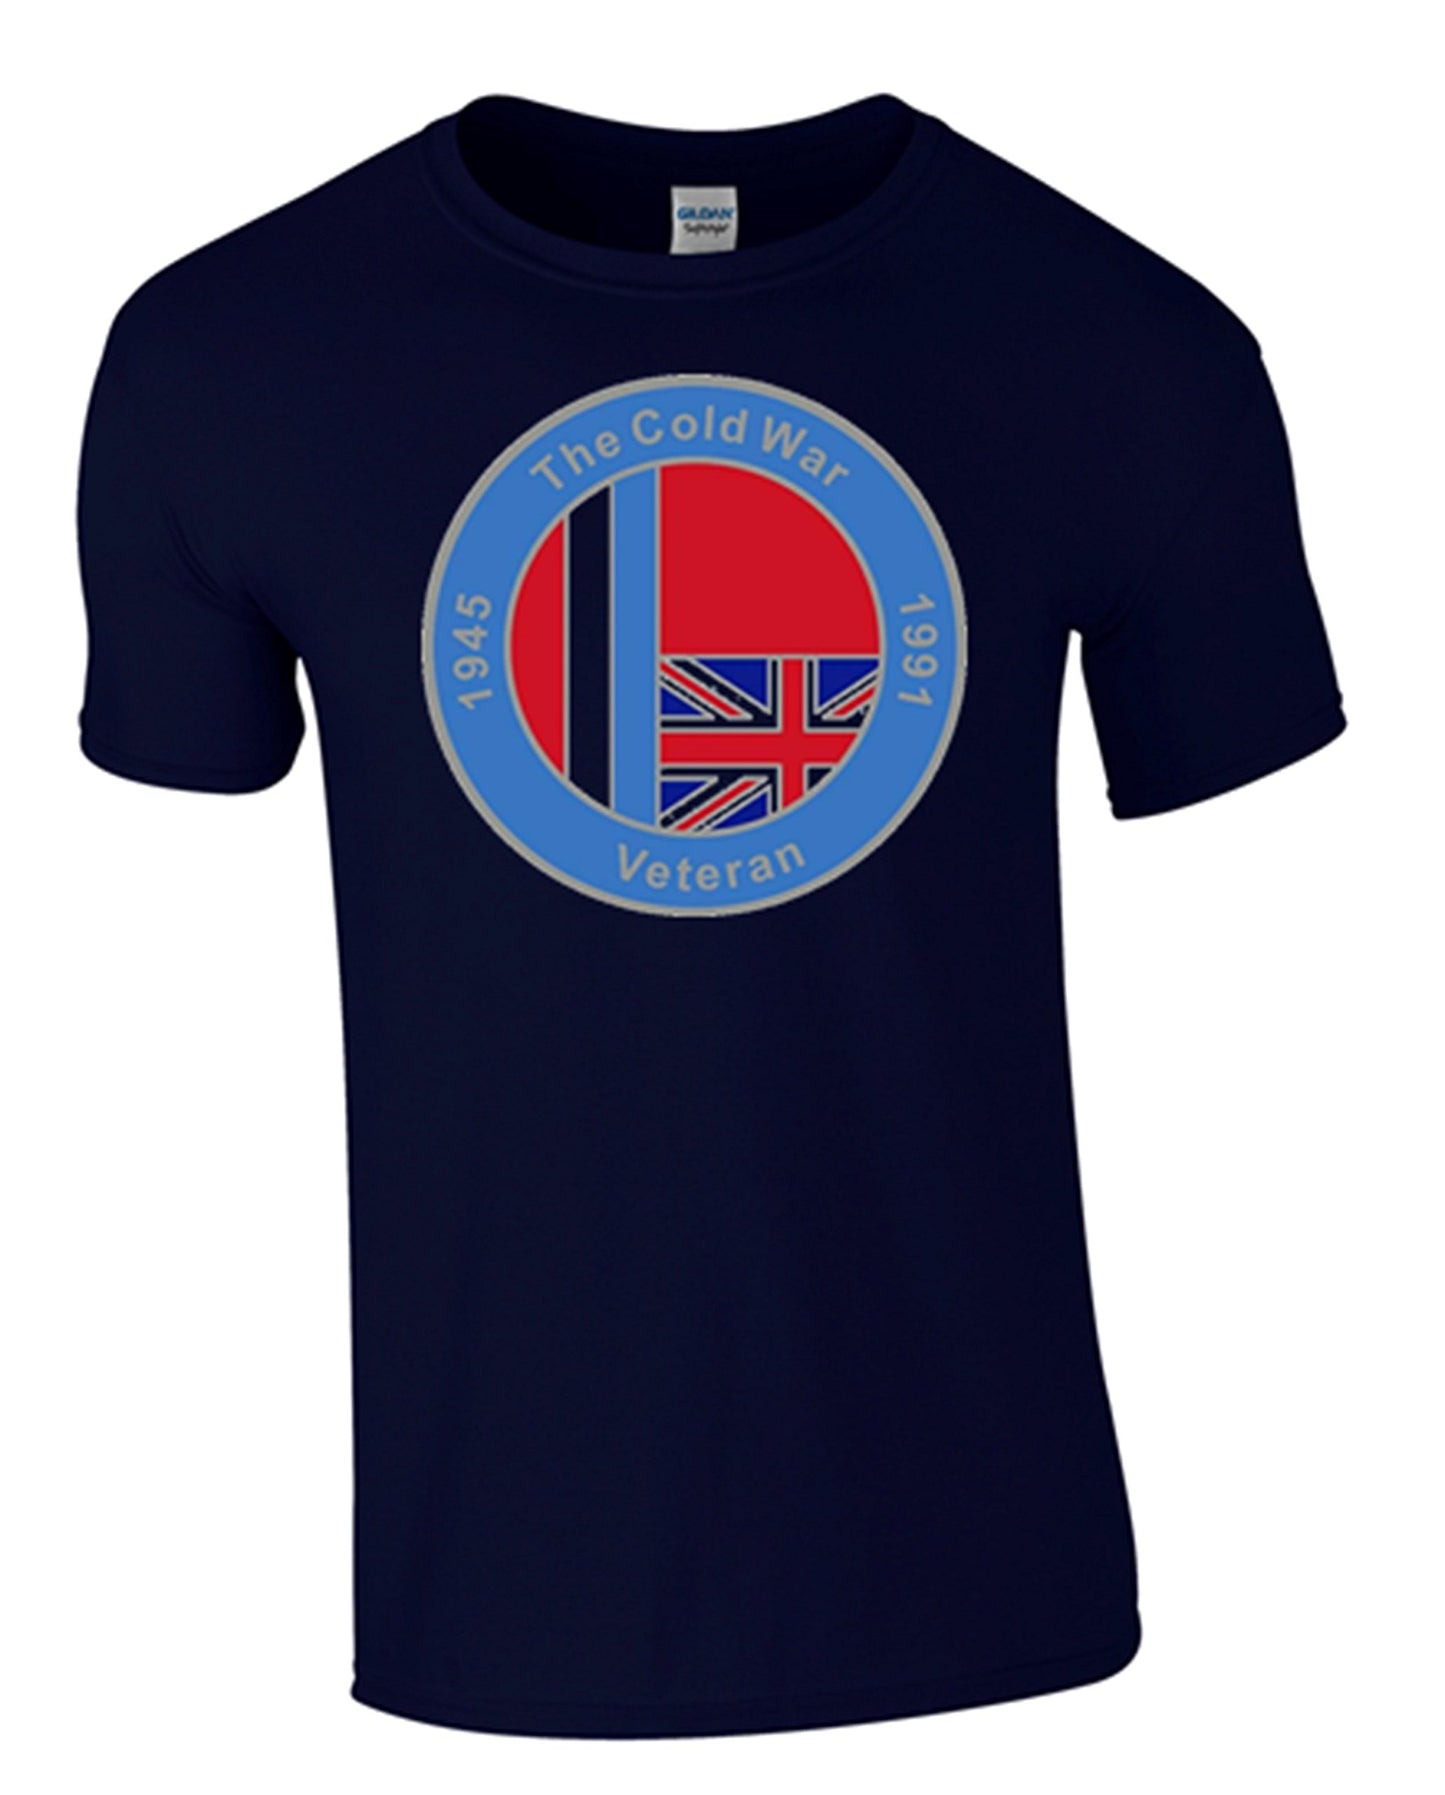 Bear Essentials Clothing. Cold War Op Banner T/Shirt (L, Blue) - Army 1157 kit Army 1157 Kit